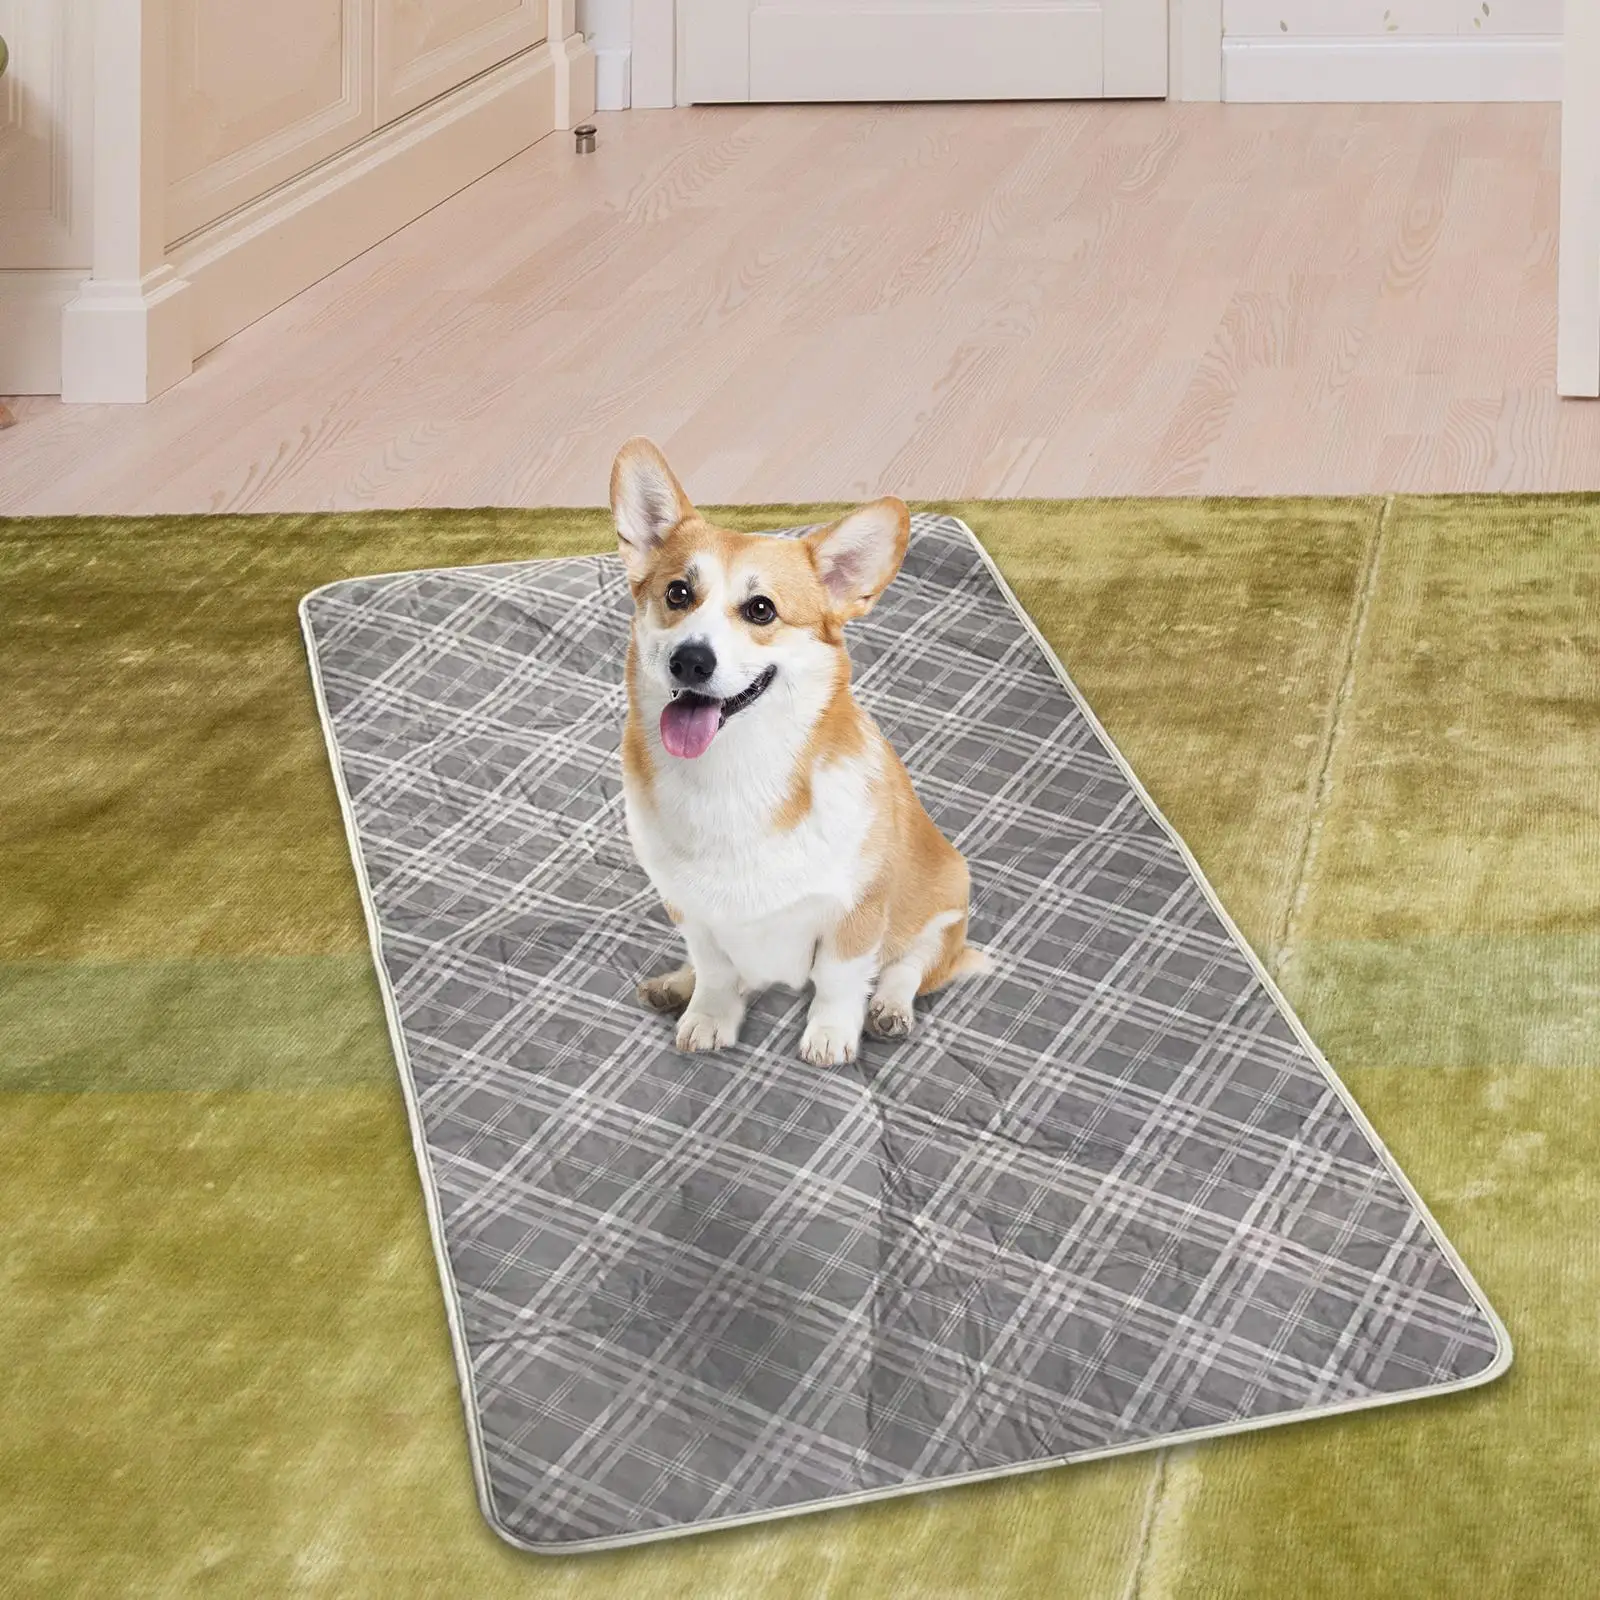 Pet Dog Pee Pad Mat Puppy Washable Reusable Blanket Cushion for Crate Outdoor Playpen Sleeping Pad Cage Supplies